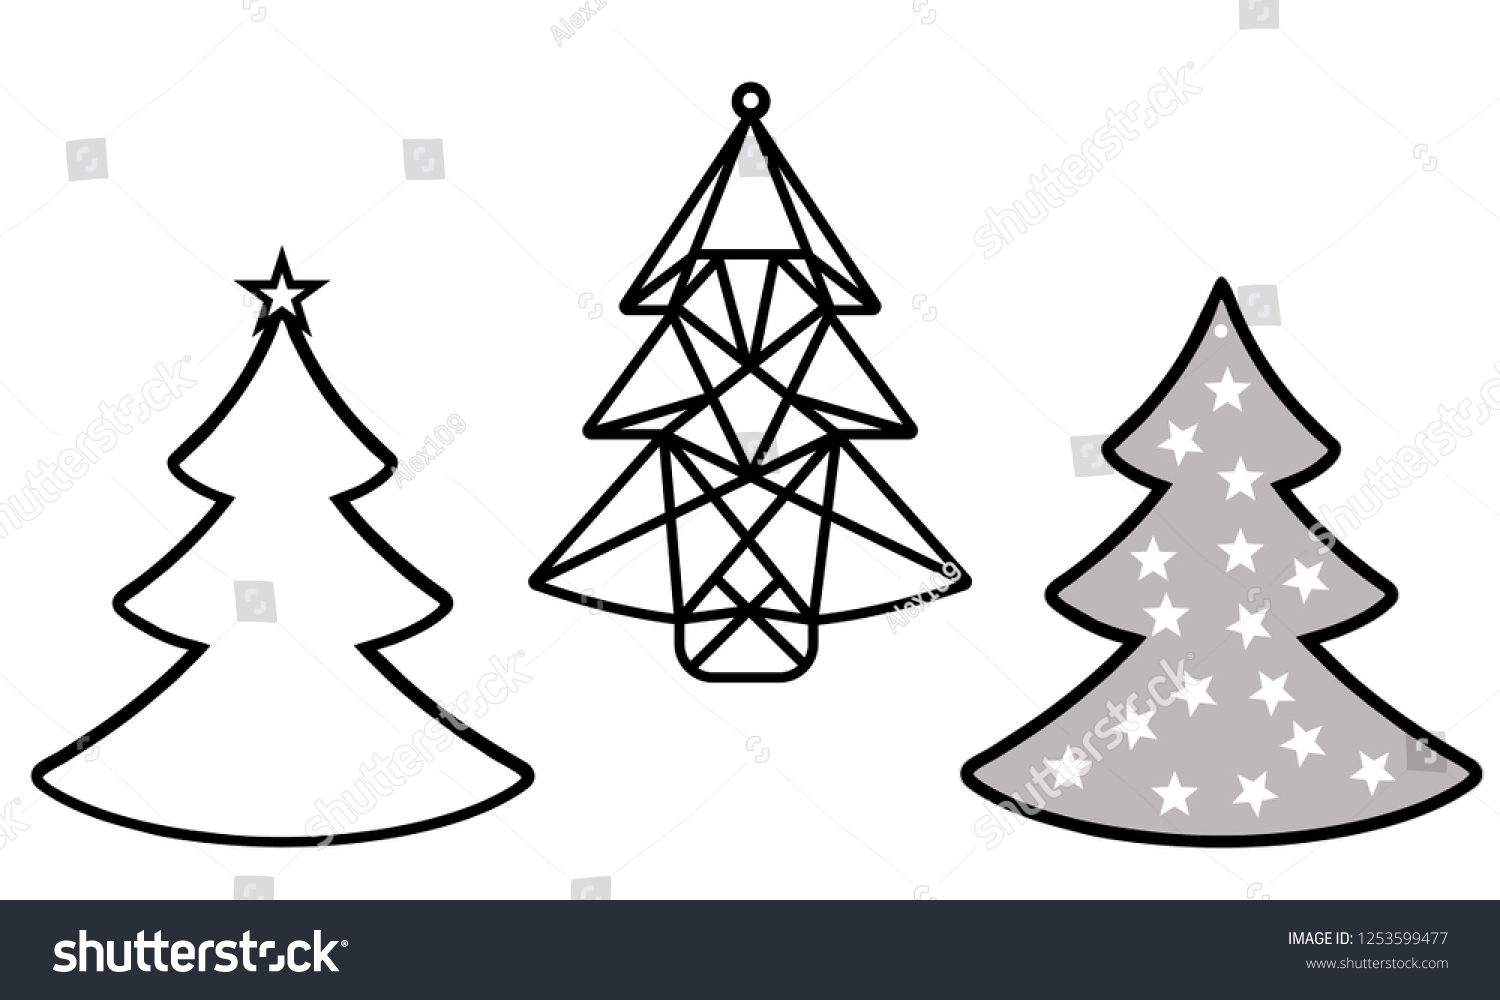 Christmas Tree Cut Out Template from image.shutterstock.com